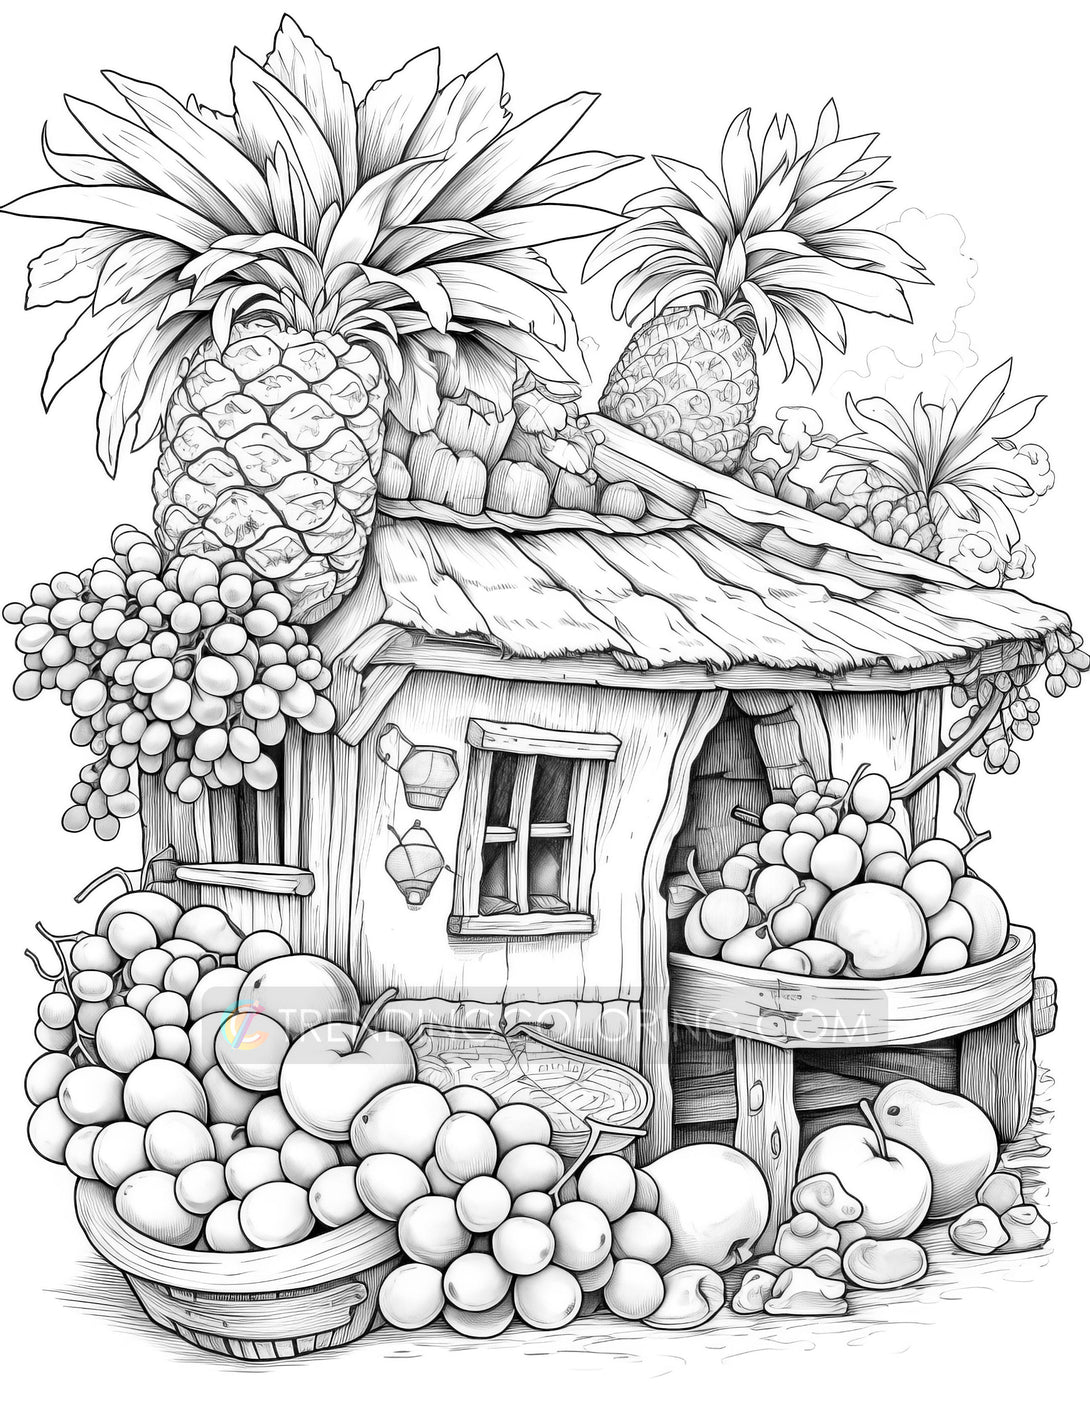 Fun & Games :: Books :: Coloring Books :: Printable Color Fruit and  Vegetable Patterns Adult and Teen Coloring Book with 50 Amazing Patterns to  print at home and color. Relaxing and Beautiful!